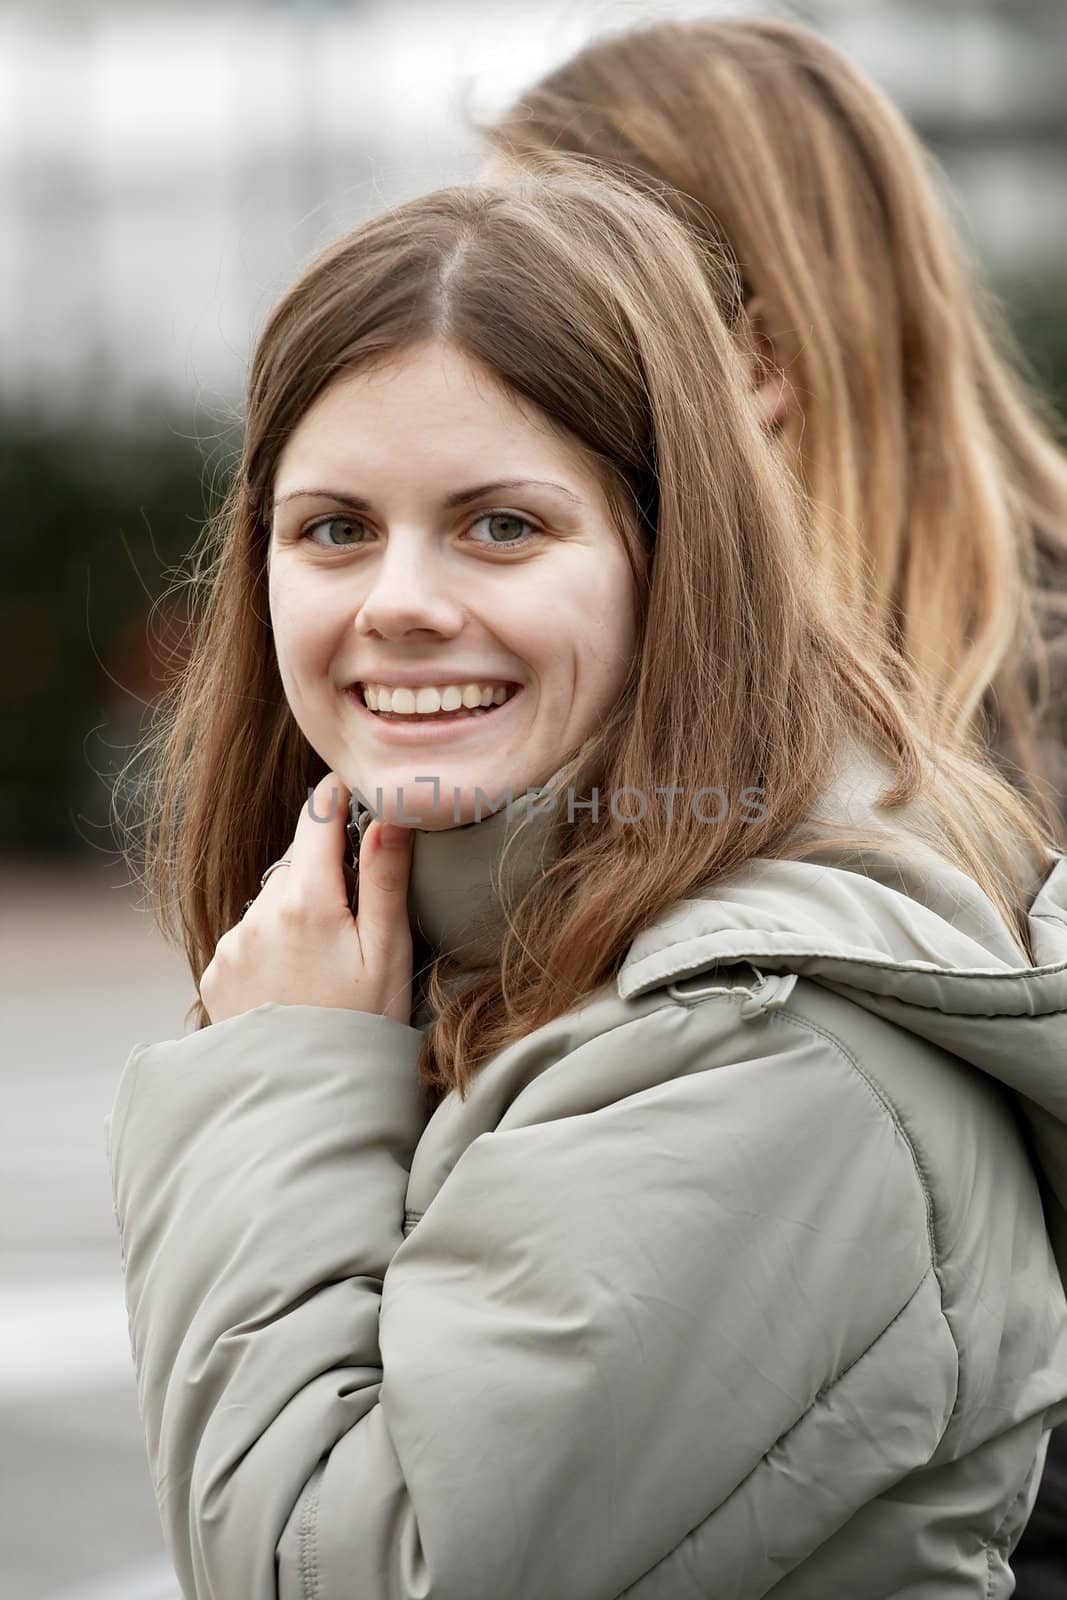 Outdoor female portrait with smiling face